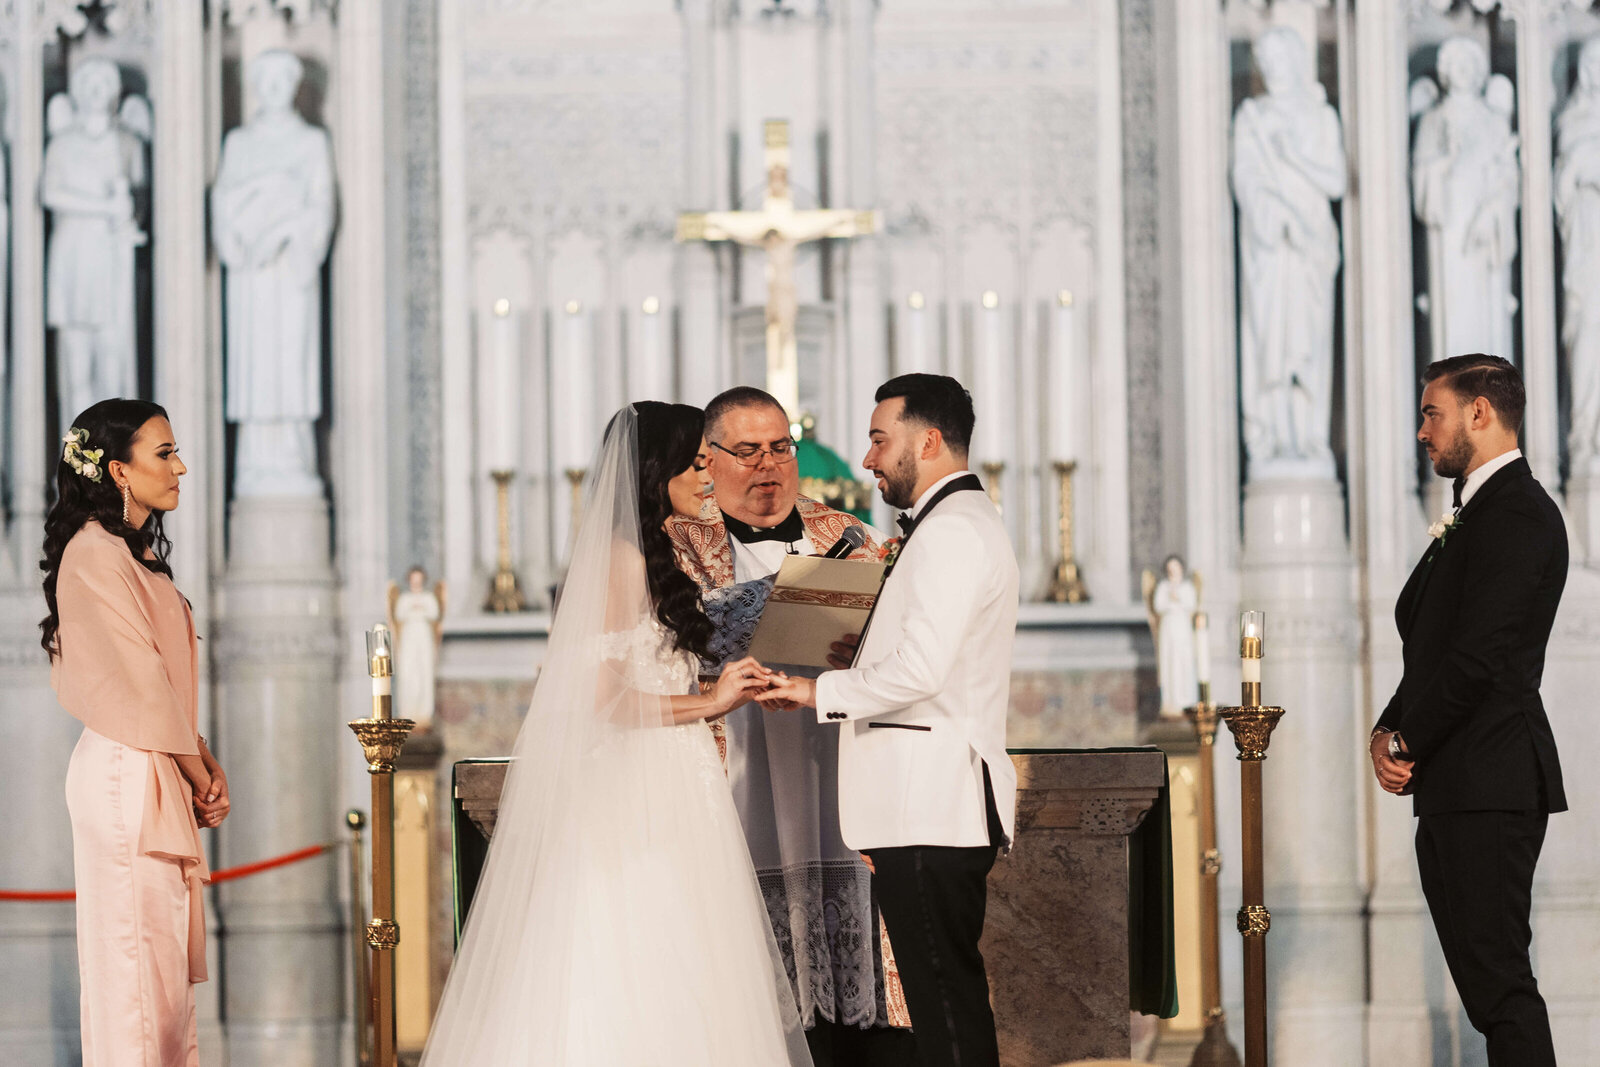 Bride and groom exchange rings on their wedding day in a NJ church.